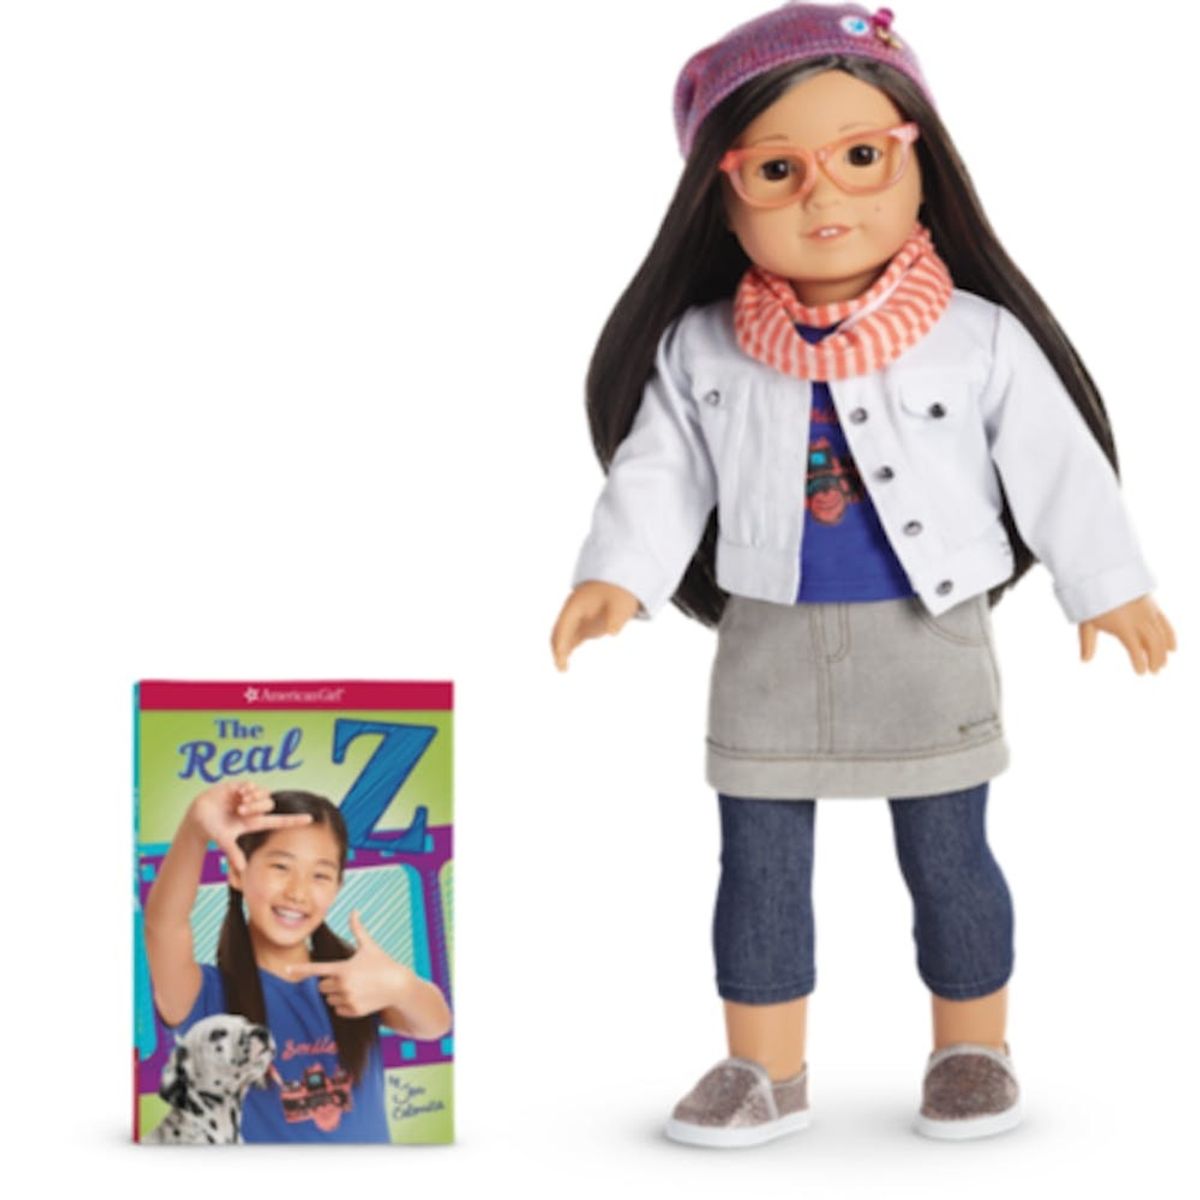 American Girl Has FINALLY Debuted Its First Korean-American Doll